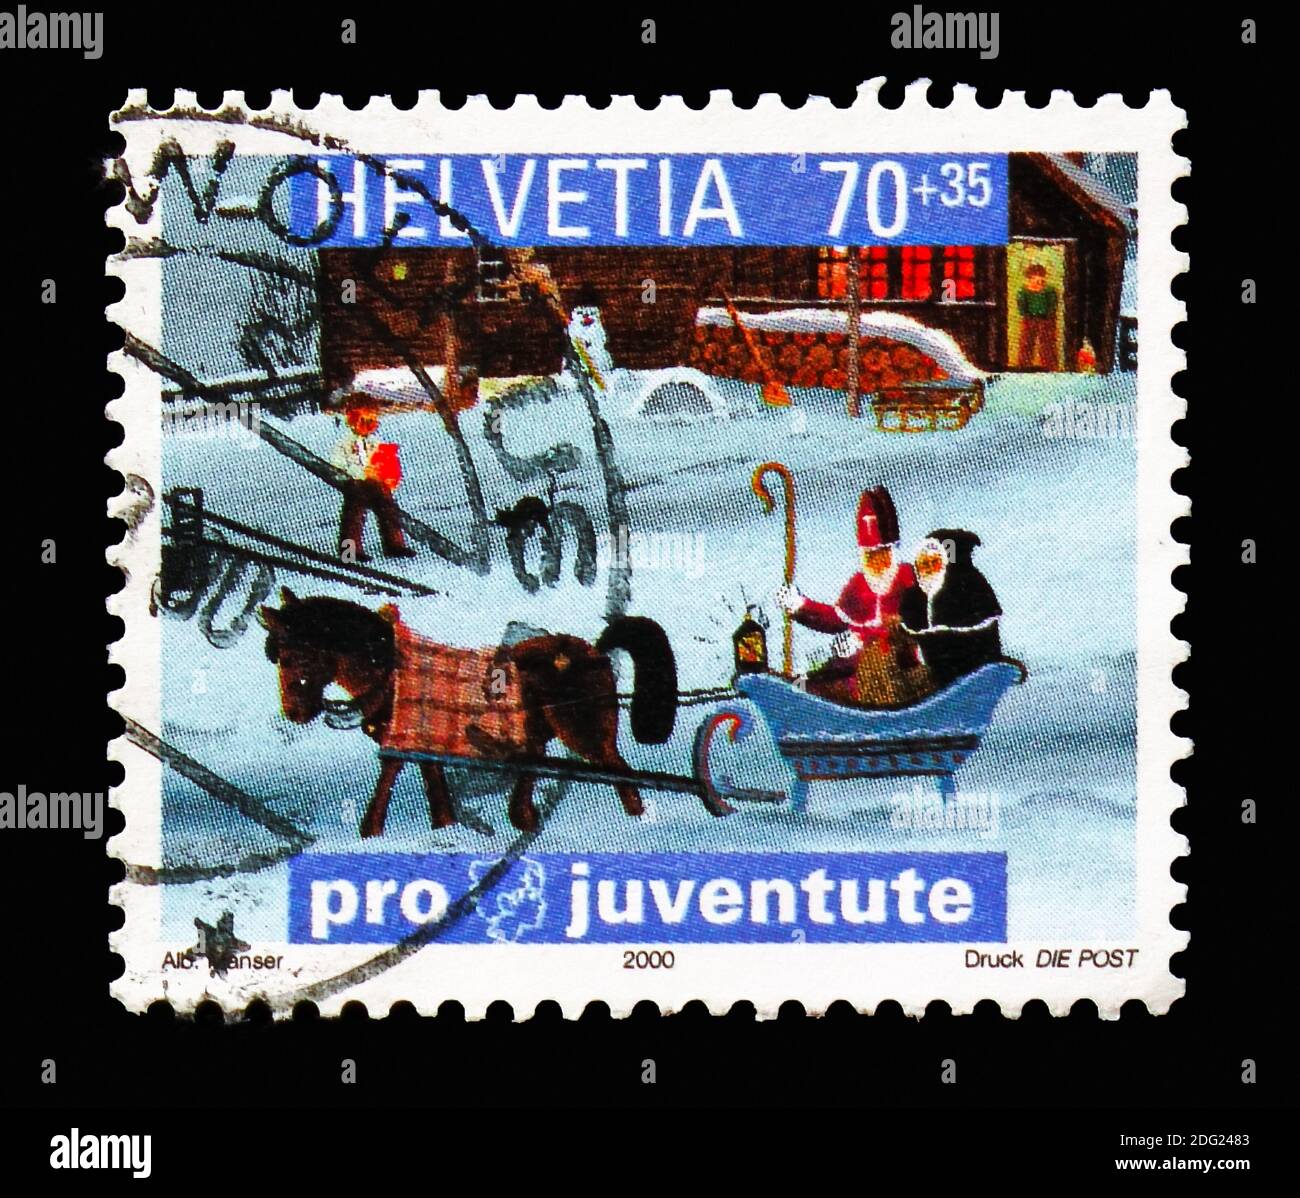 MOSCOW, RUSSIA - AUGUST 18, 2018: A stamp printed in Switzerland shows Holy Nicolas with his aid Schmutzli in a sledge, Pro Juventute: Children's Book Stock Photo